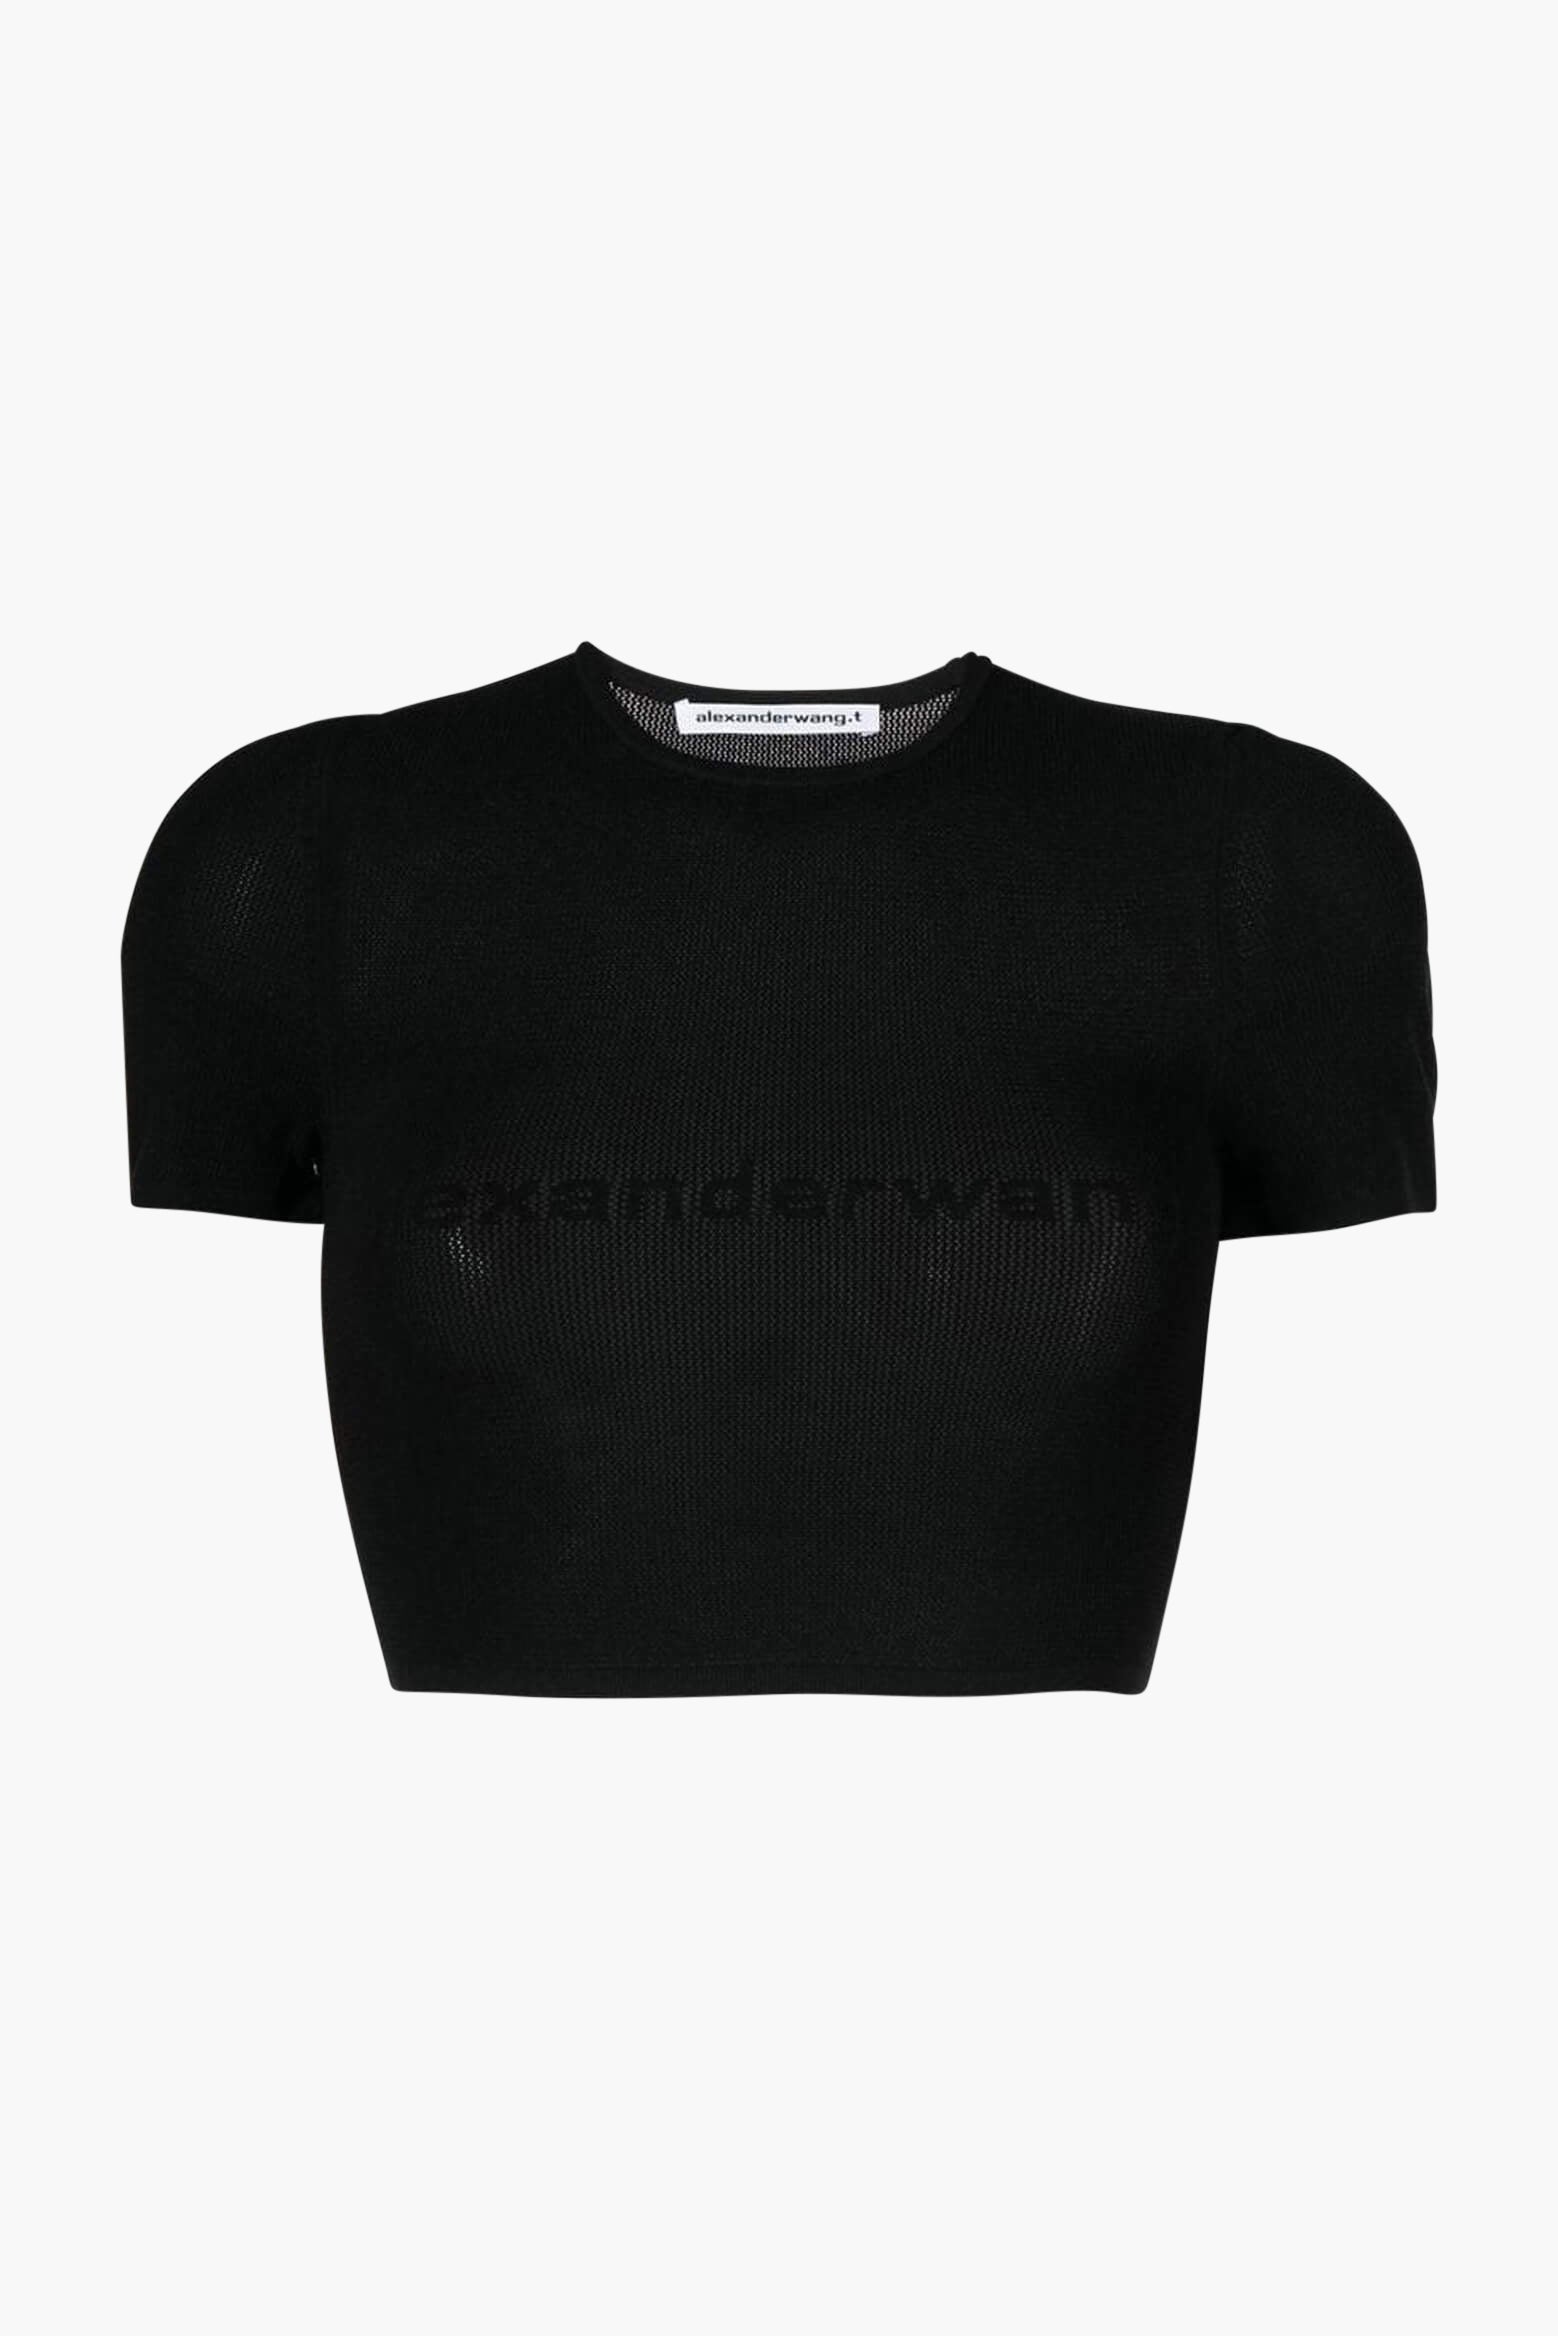 Alexander Wang T Logo Mesh Tee in Black available at TNT The New Trend Australia.